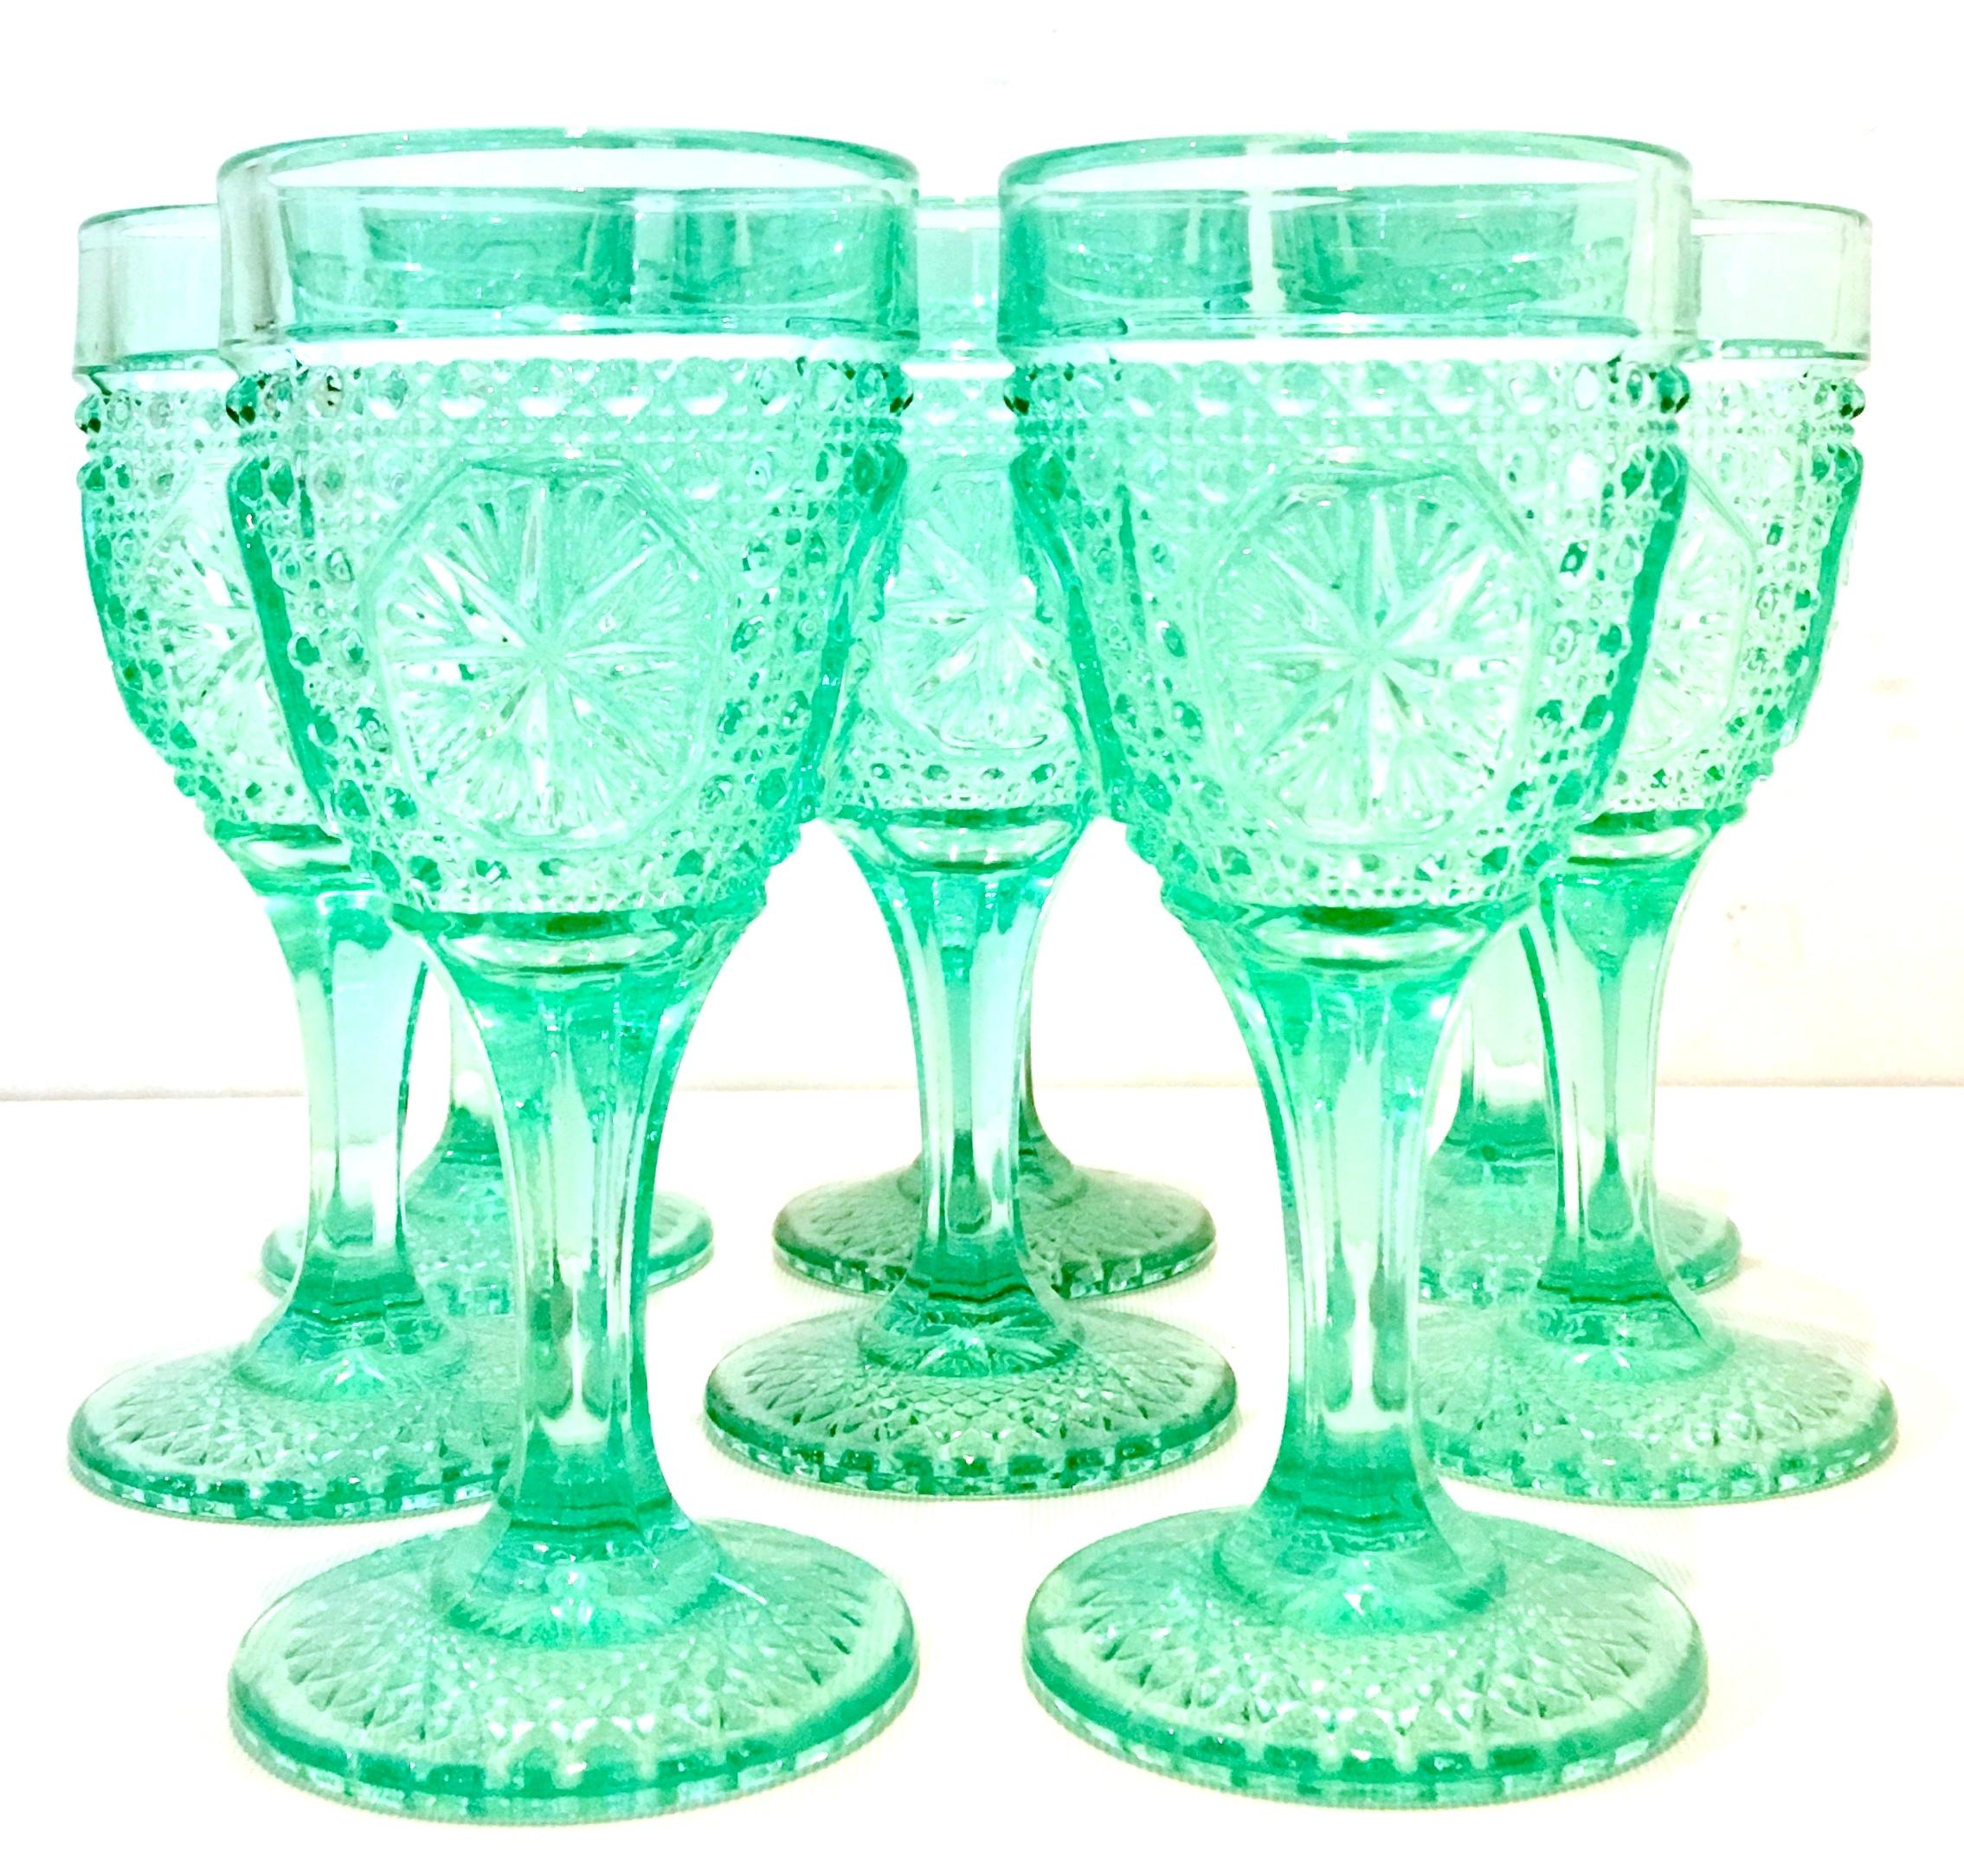 Mid-20th Century American cut pressed glass textured aqua green stem drinking glasses, set of eight pieces. These lovely raised and textured starburst stem glasses feature a cut and faceted stem and raised dot and starburst pattern.